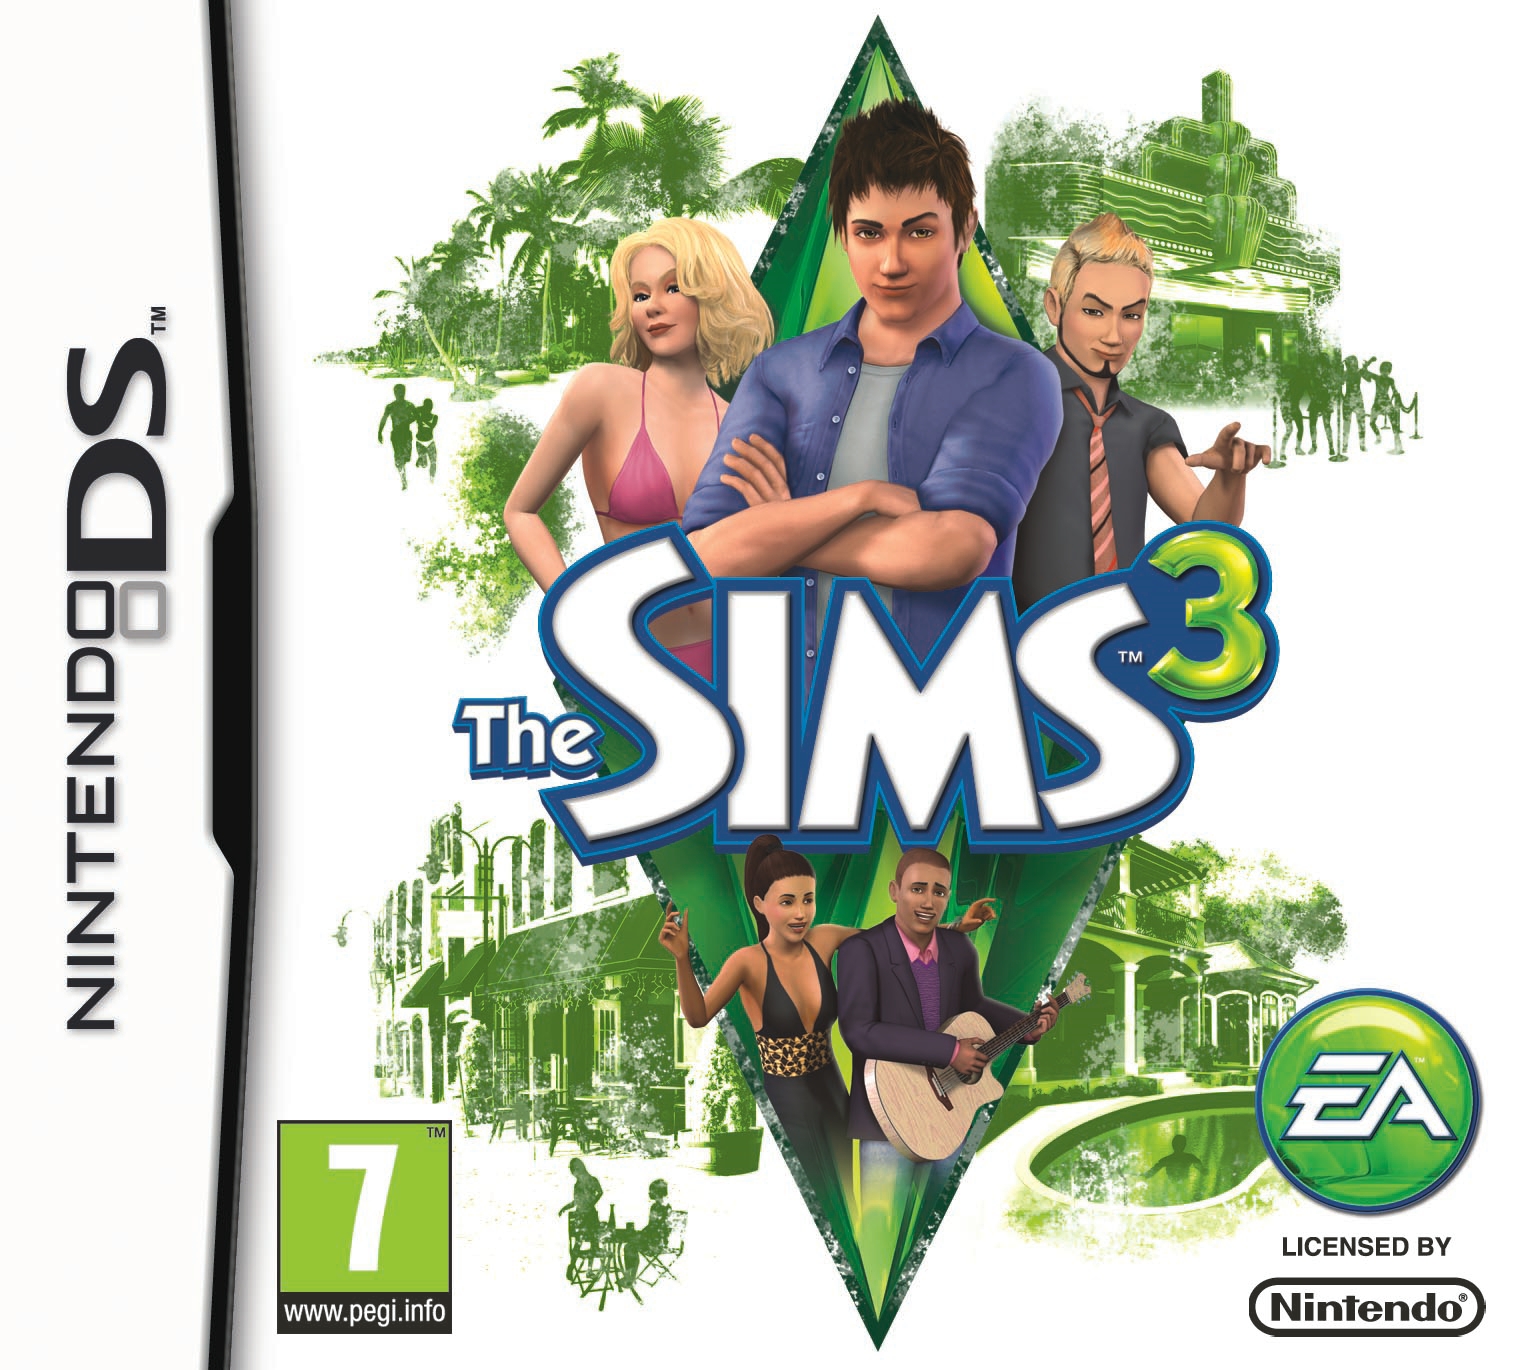 Sims 3 (Nintendo DS) - The Sims Wiki - The Sims, The Sims 2, The Sims